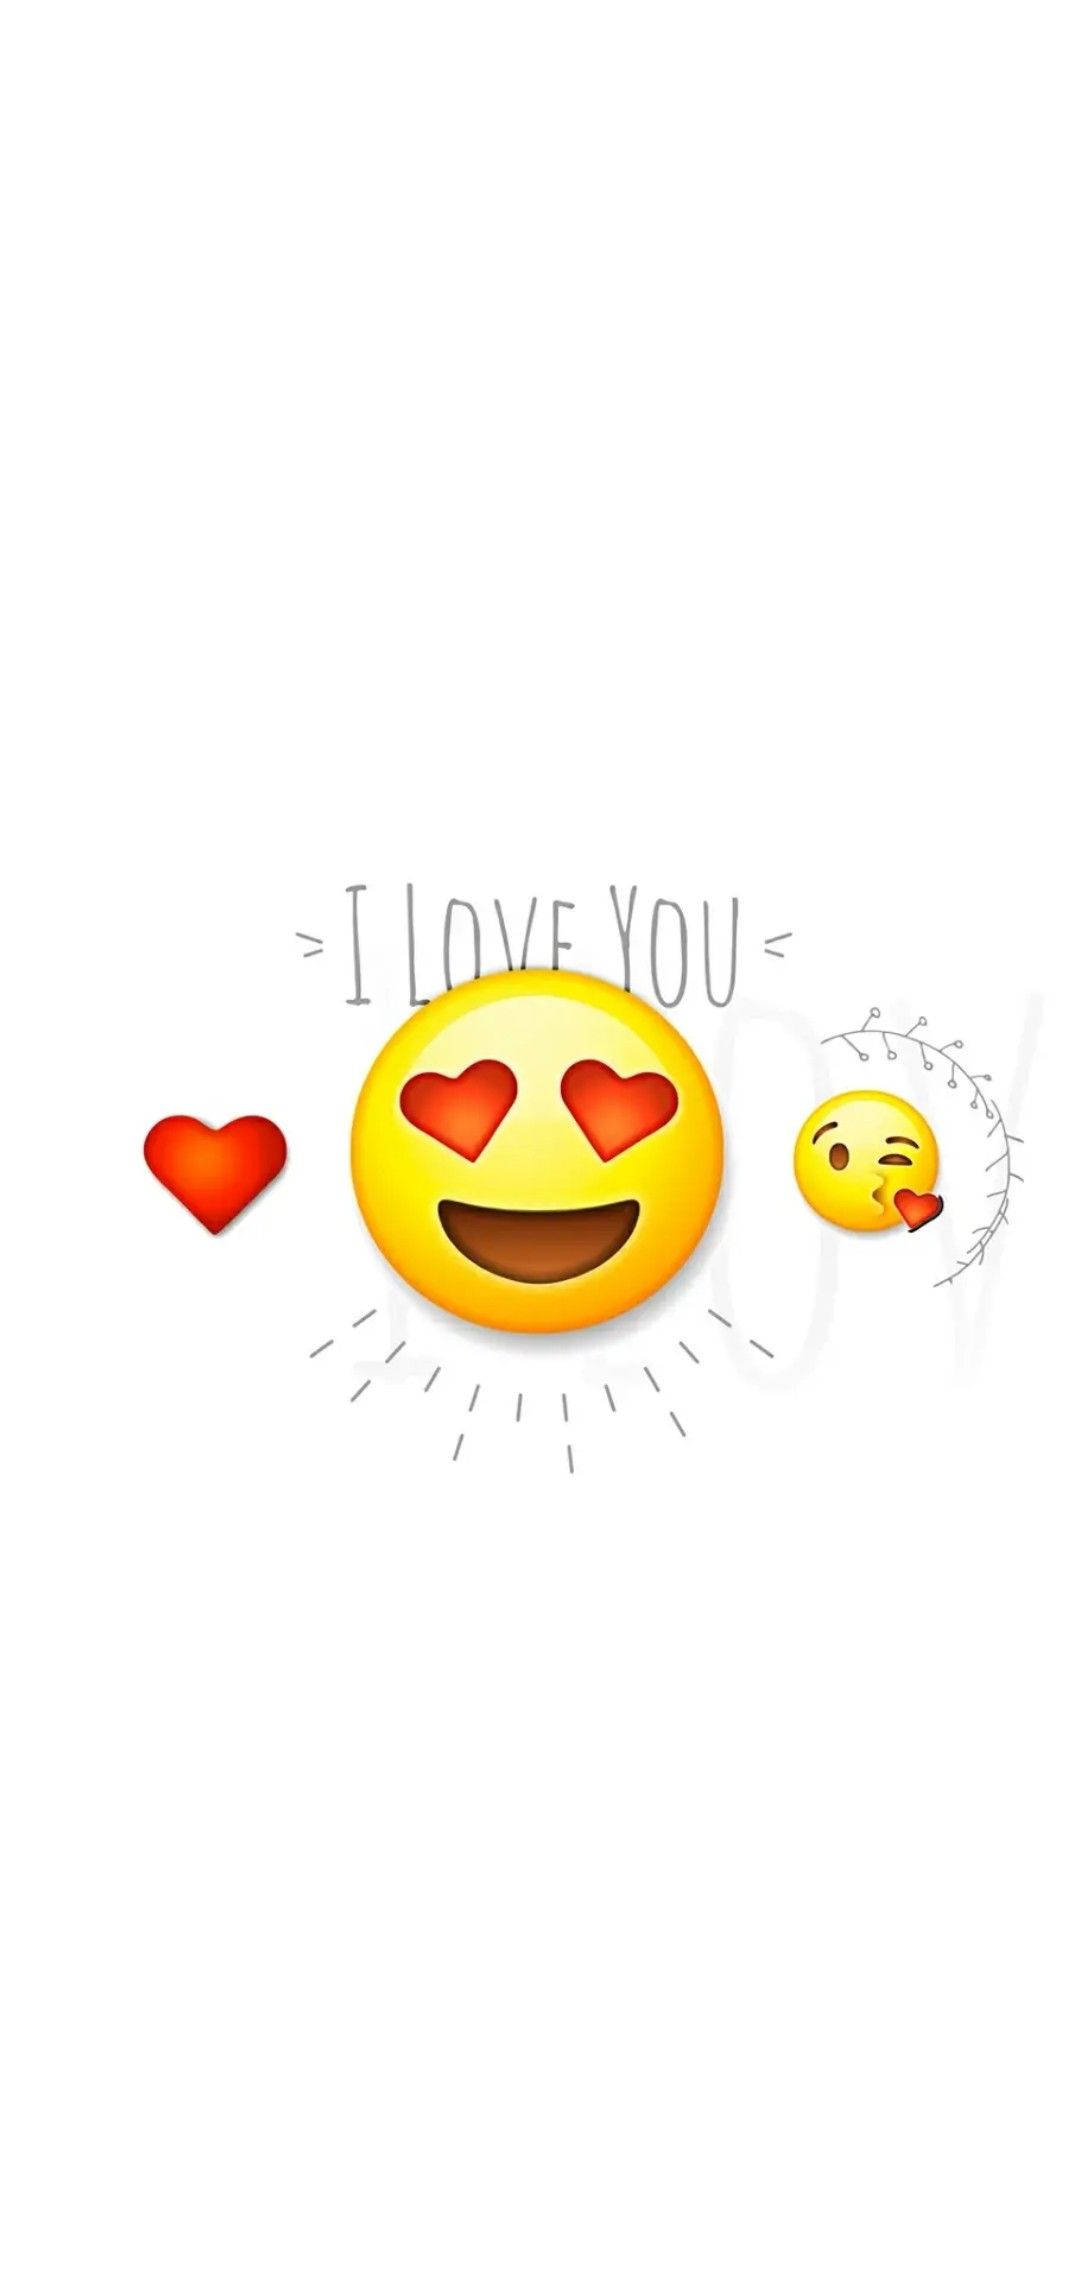 I love you emoticons wallpaper for iPhone and Android - Emoji